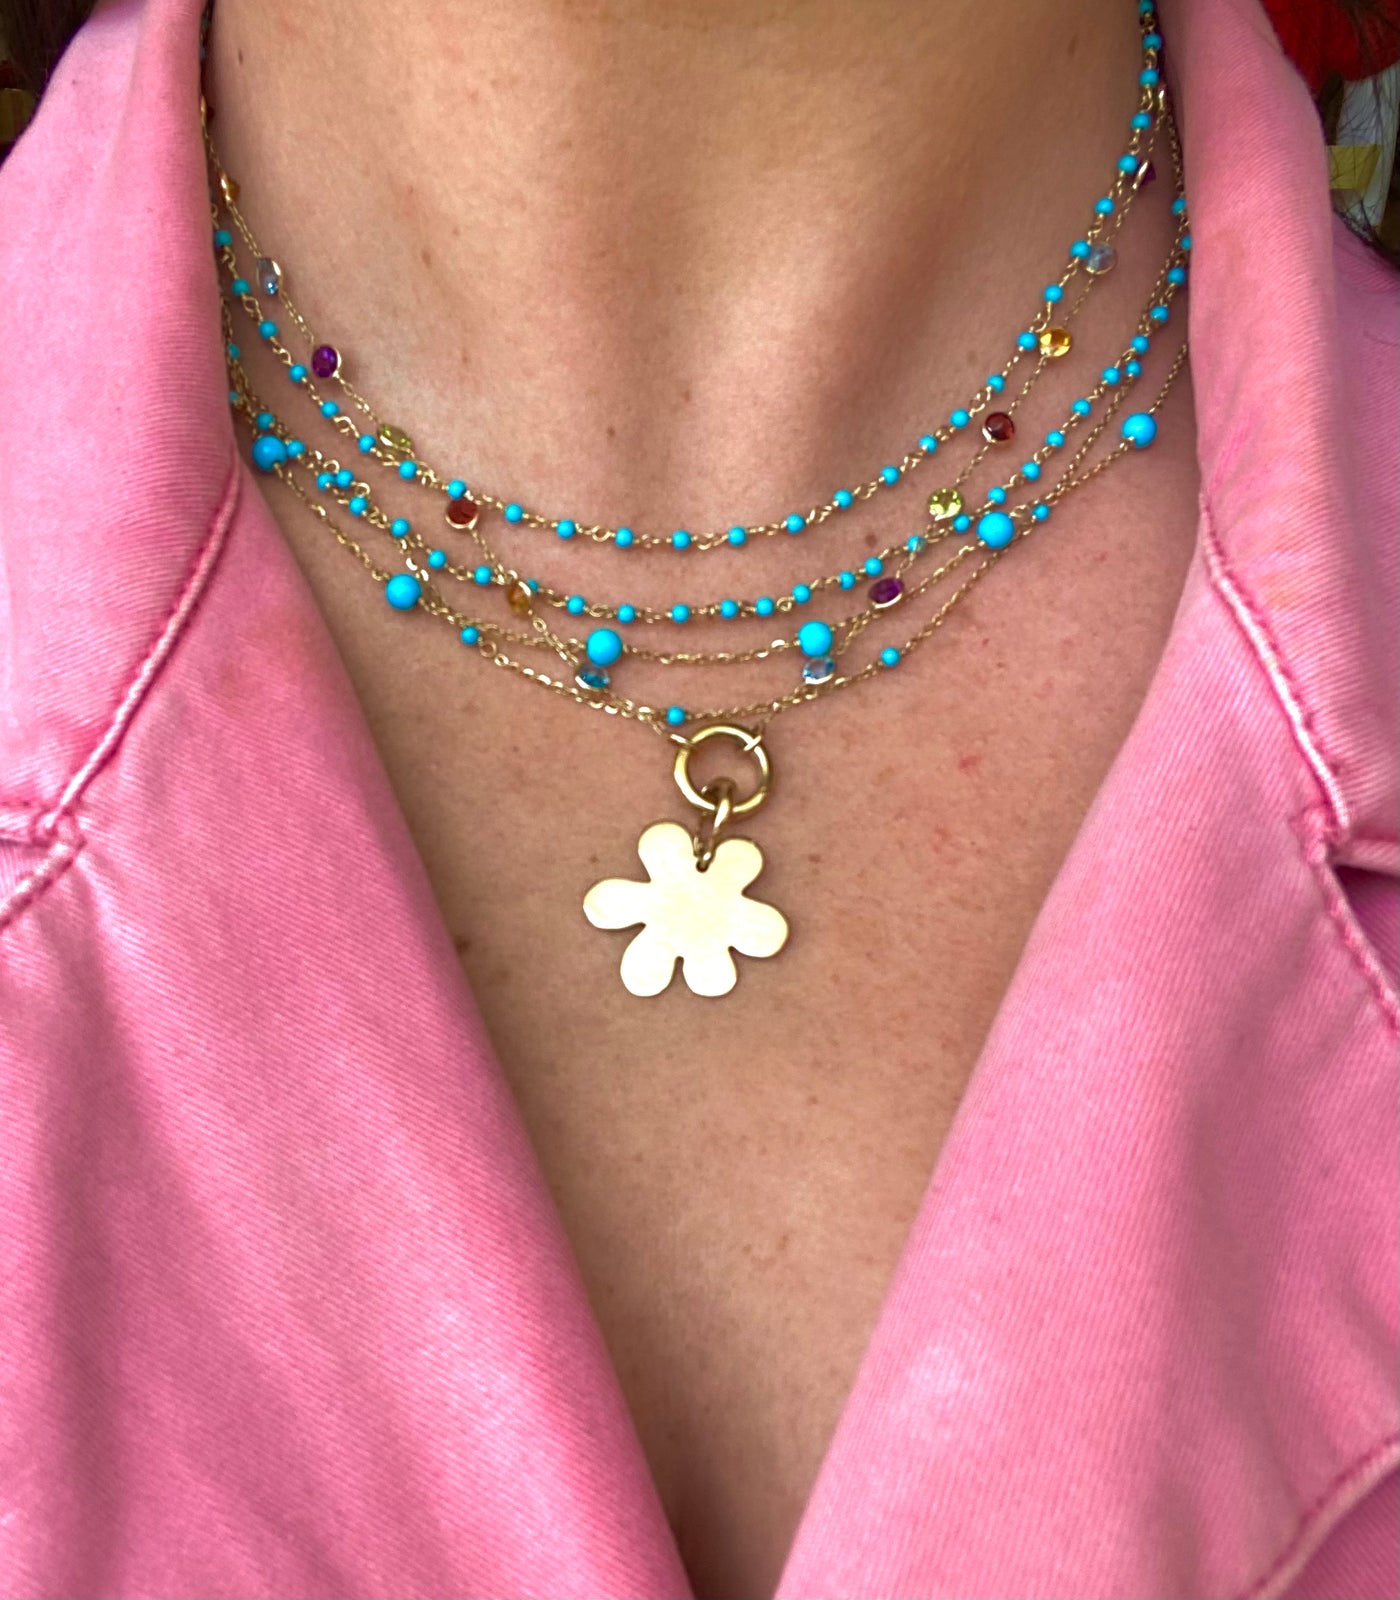 Turquoise Bead Necklace/Turquoise